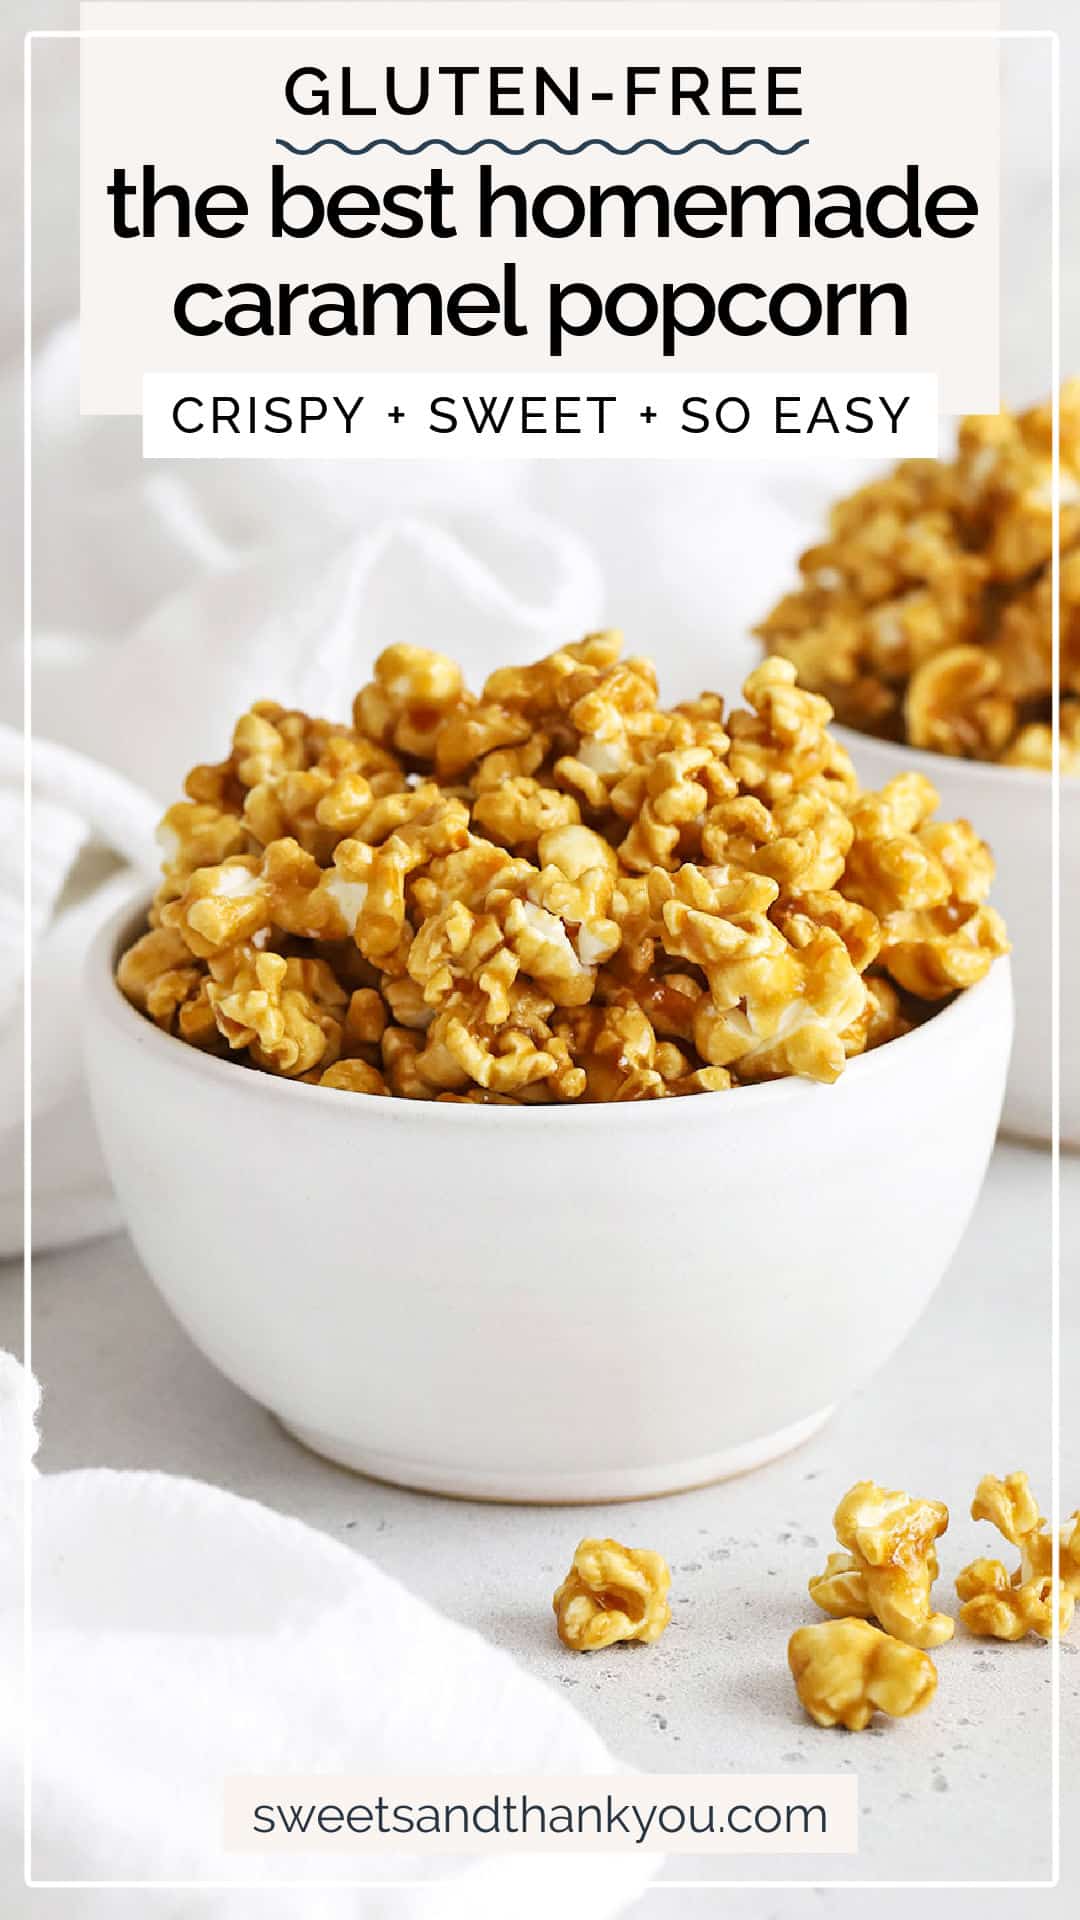 The BEST Caramel Popcorn - This easy homemade caramel corn recipe can be made crispy or gooey. You'll LOVE the incredible flavor! / easy caramel popcorn recipe / homemade caramel popcorn / crunchy caramel popcorn / crispy caramel popcorn / easy caramel corn / the best caramel corn recipe / gluten free caramel corn / gluten free caramel popcorn /